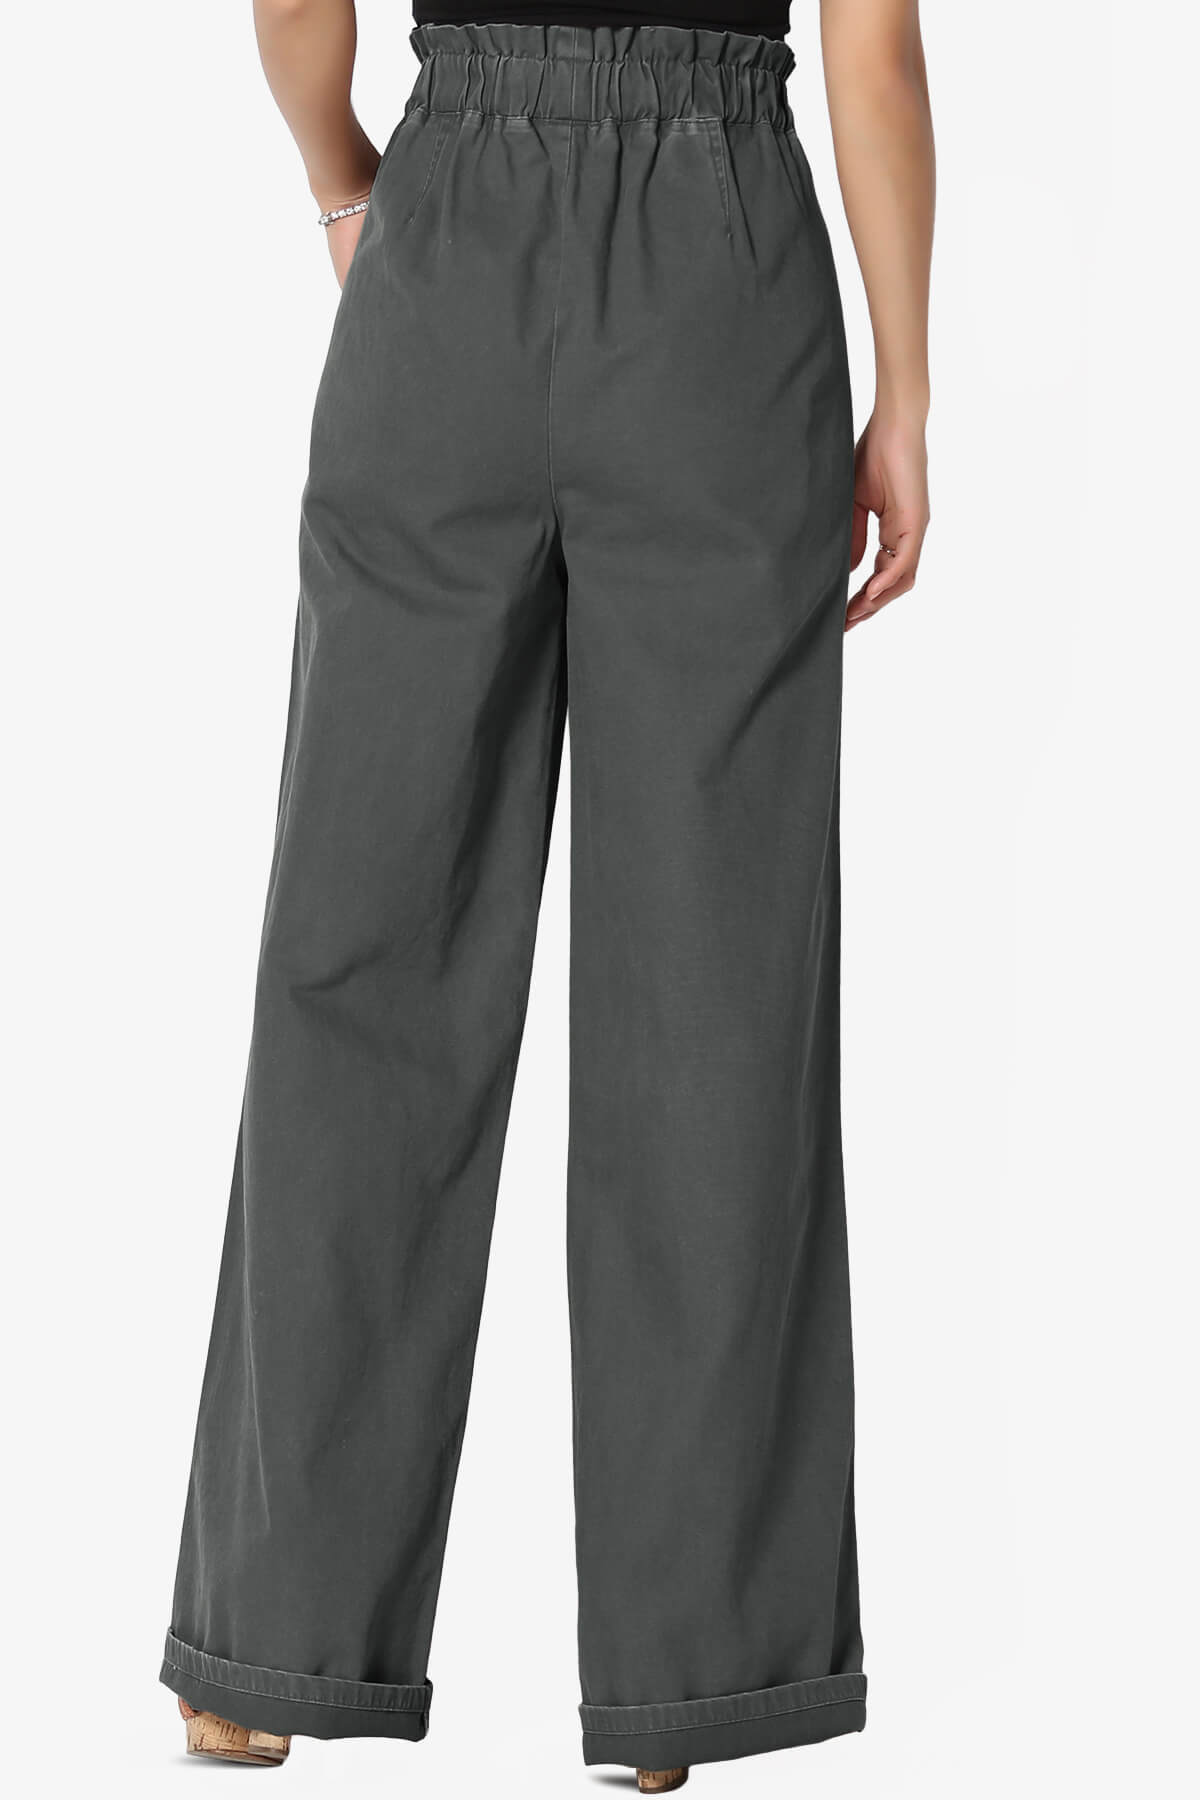 Load image into Gallery viewer, Fateful Twill High Waist Wide Leg Pants ASH GREY_2
